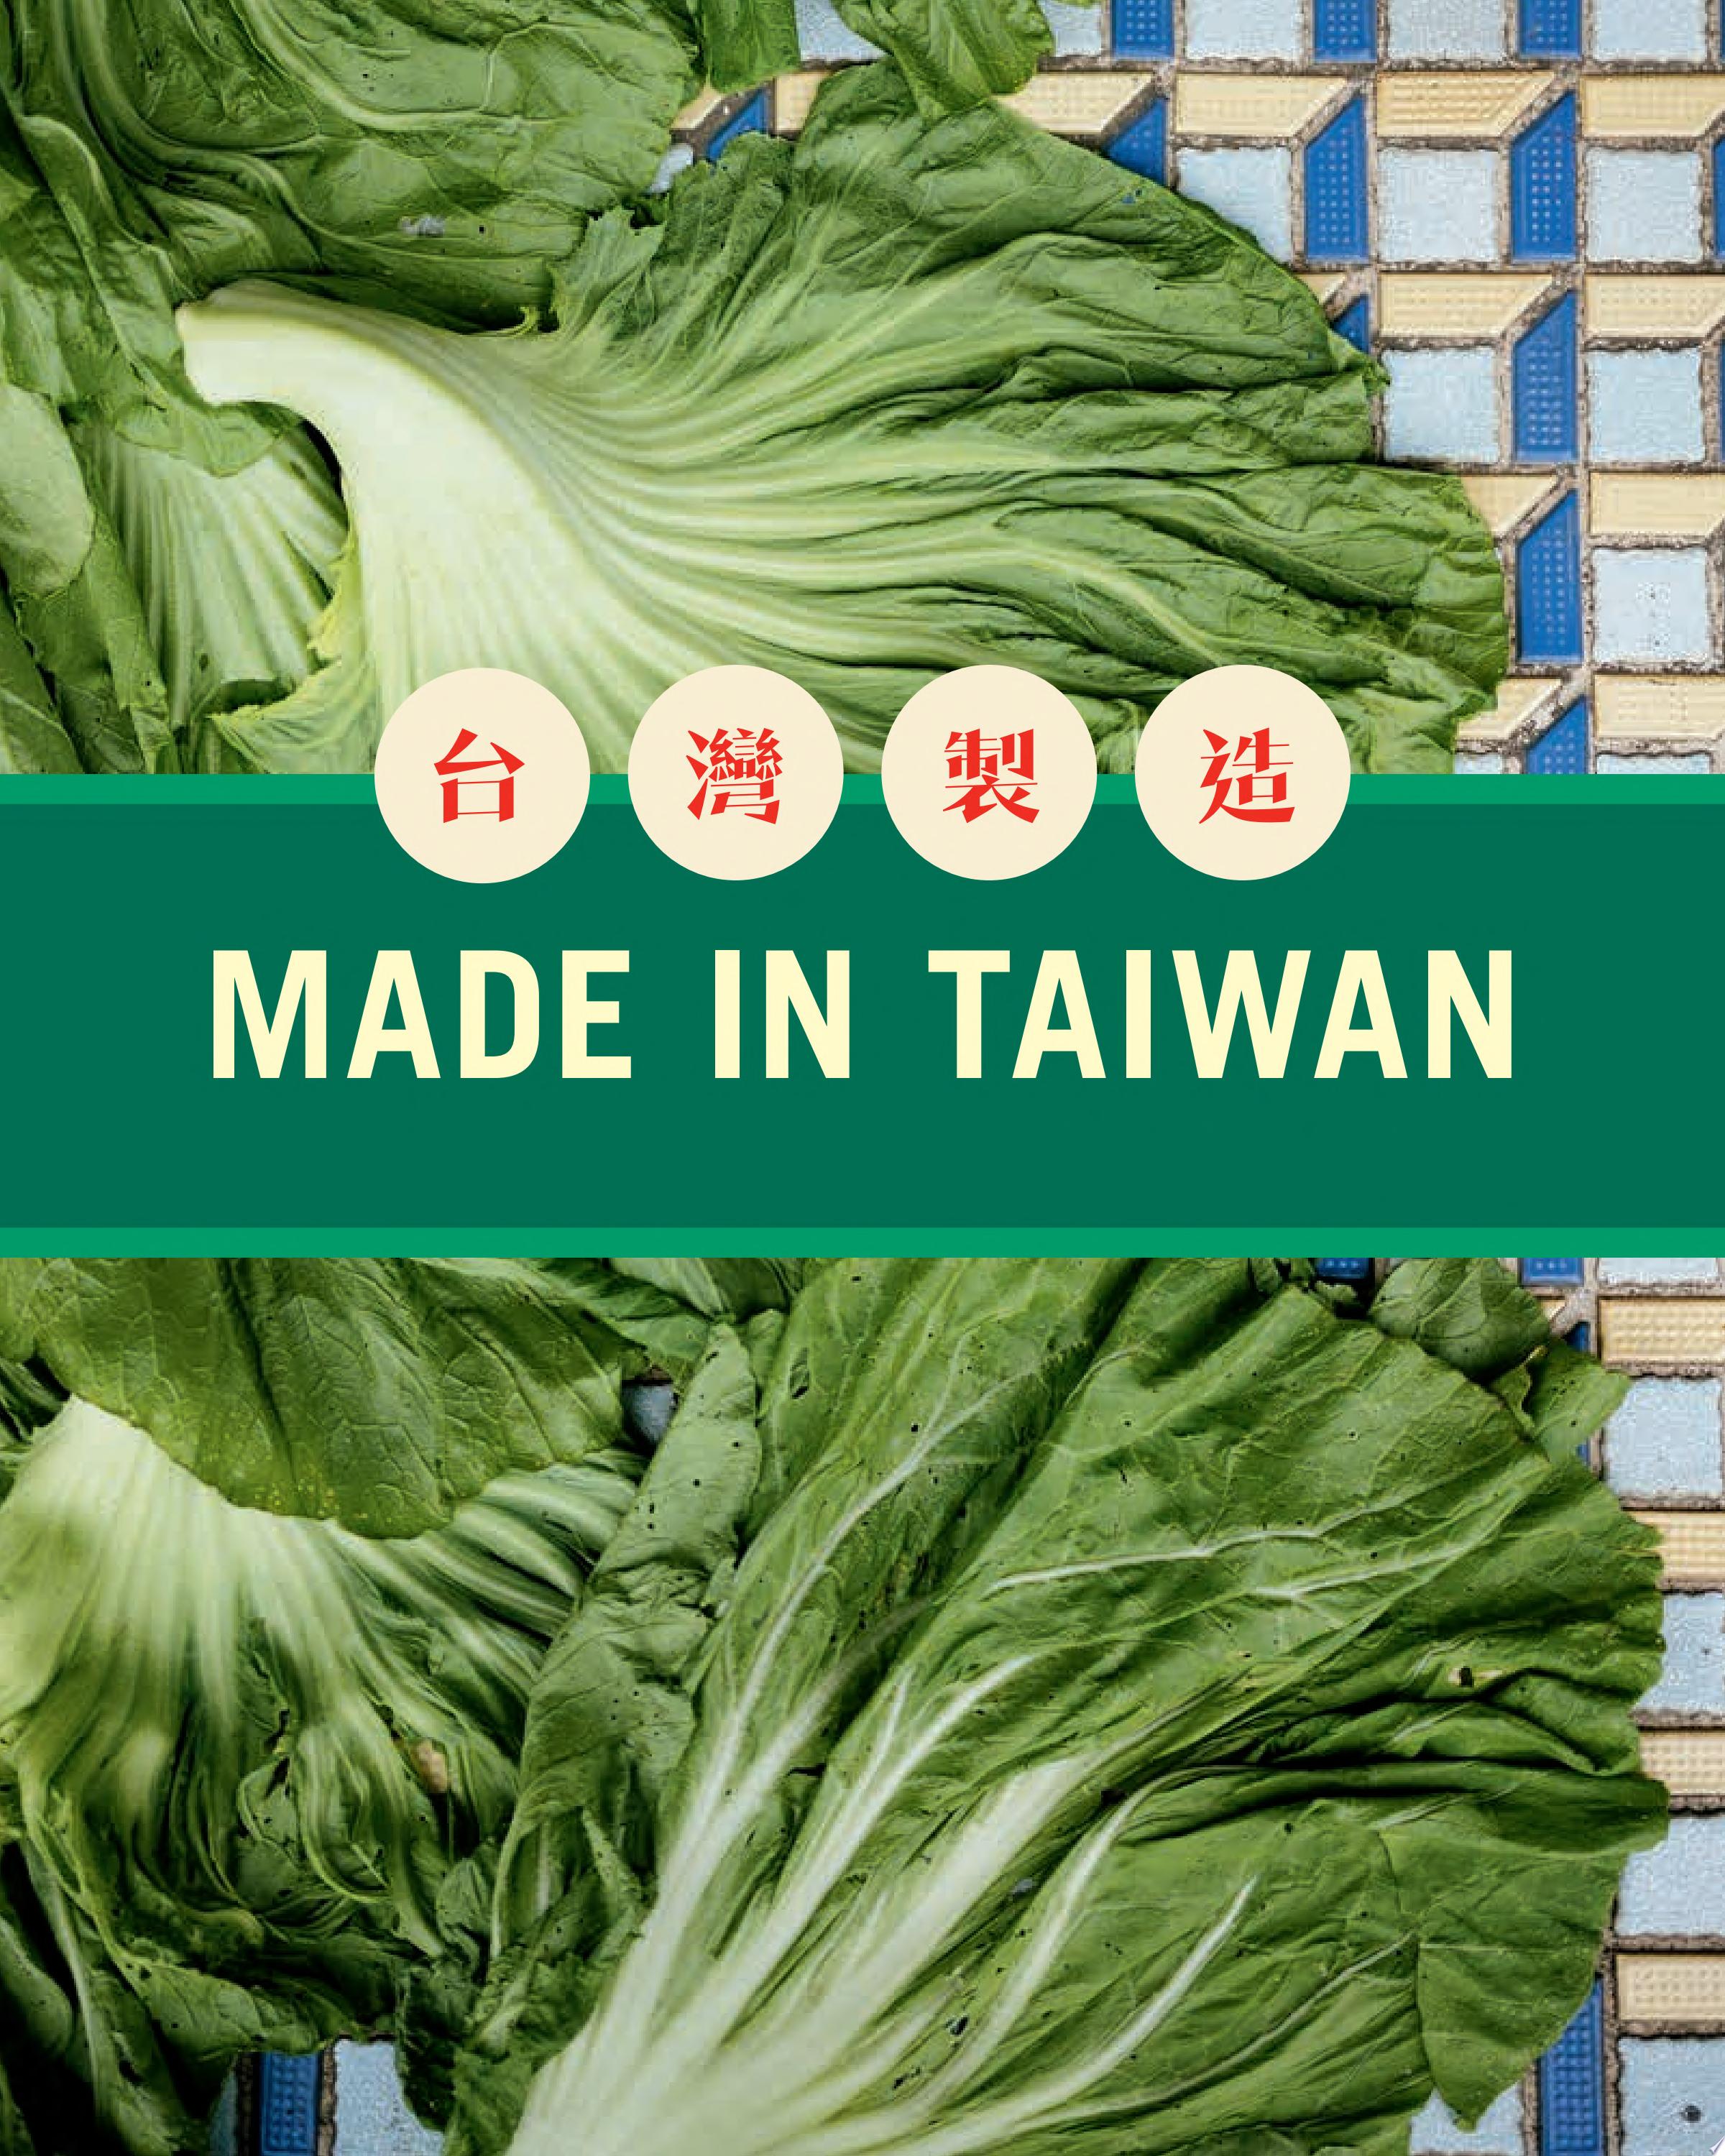 Image for "Made in Taiwan"